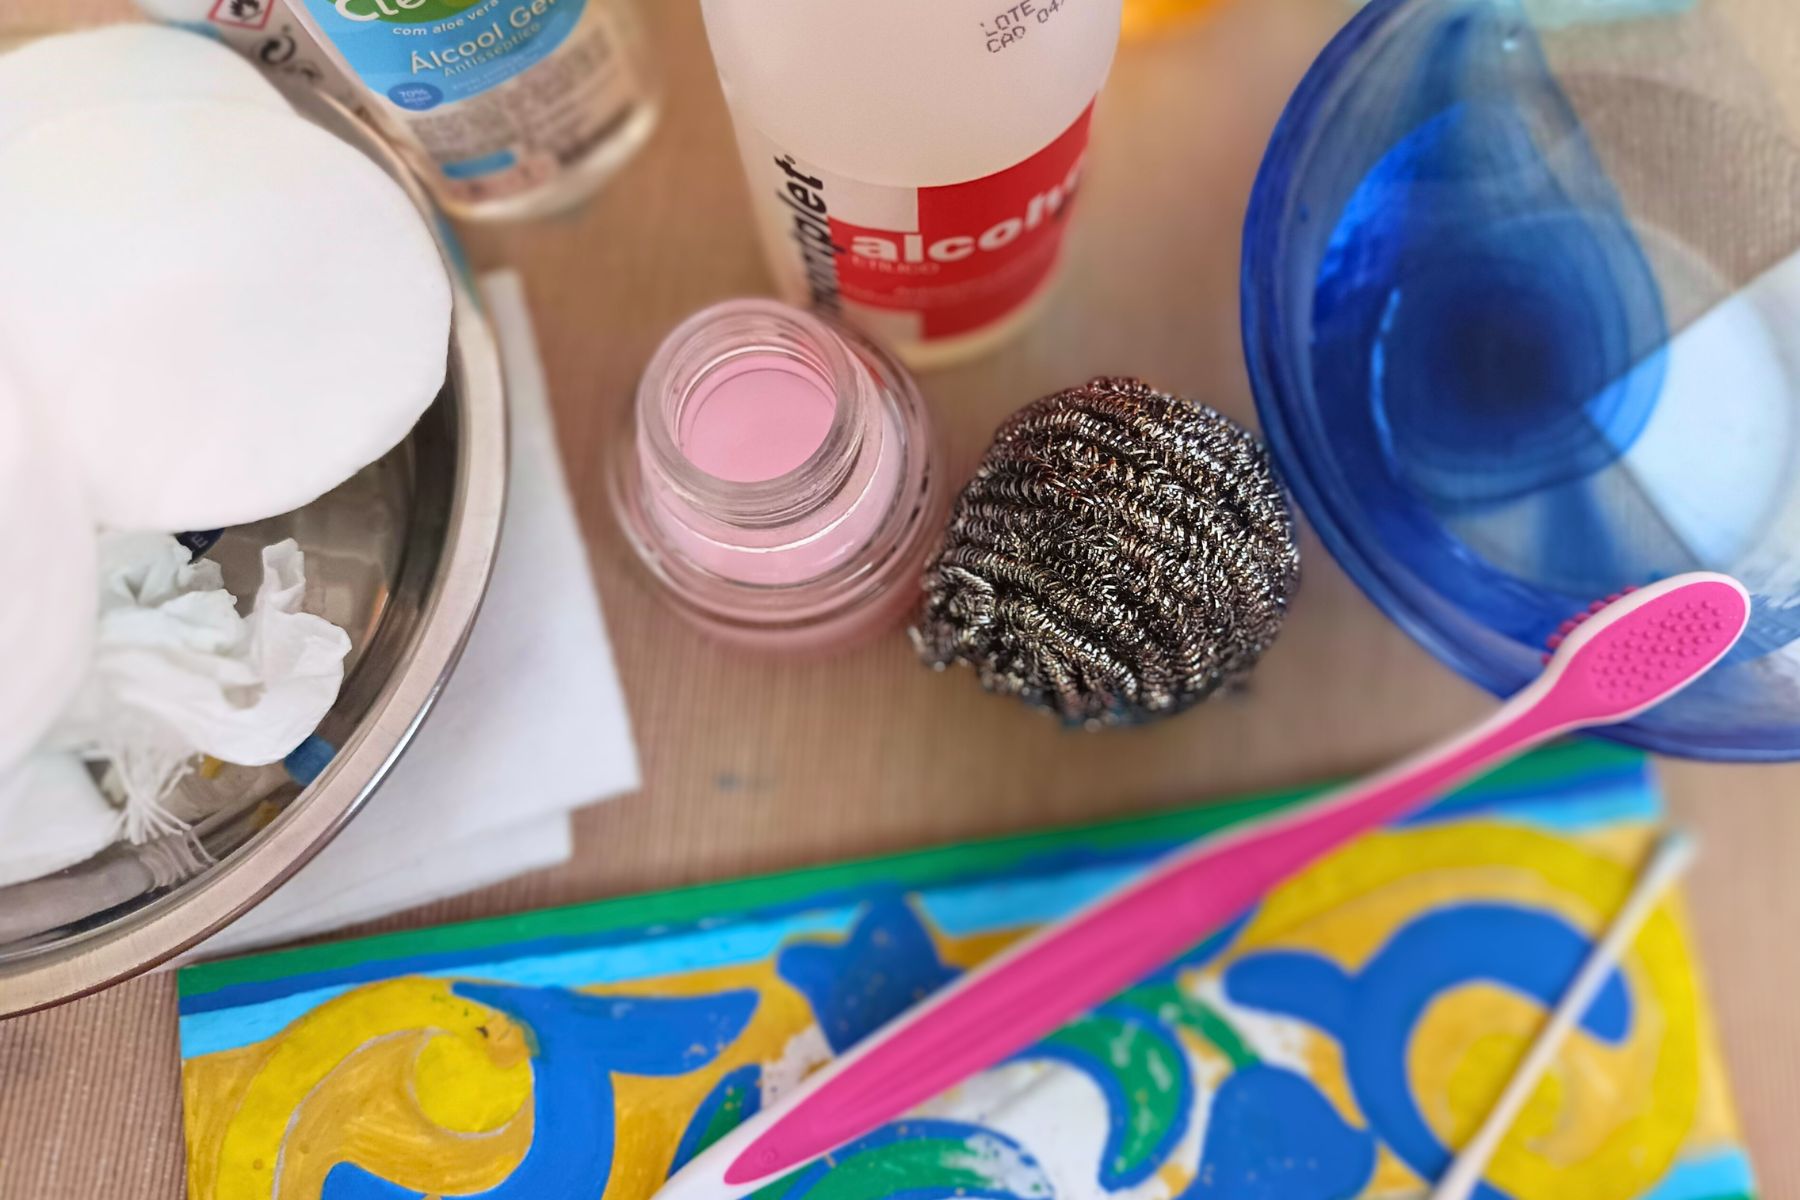 How to remove Posca pen paint from fabric, plastic, leather, and more